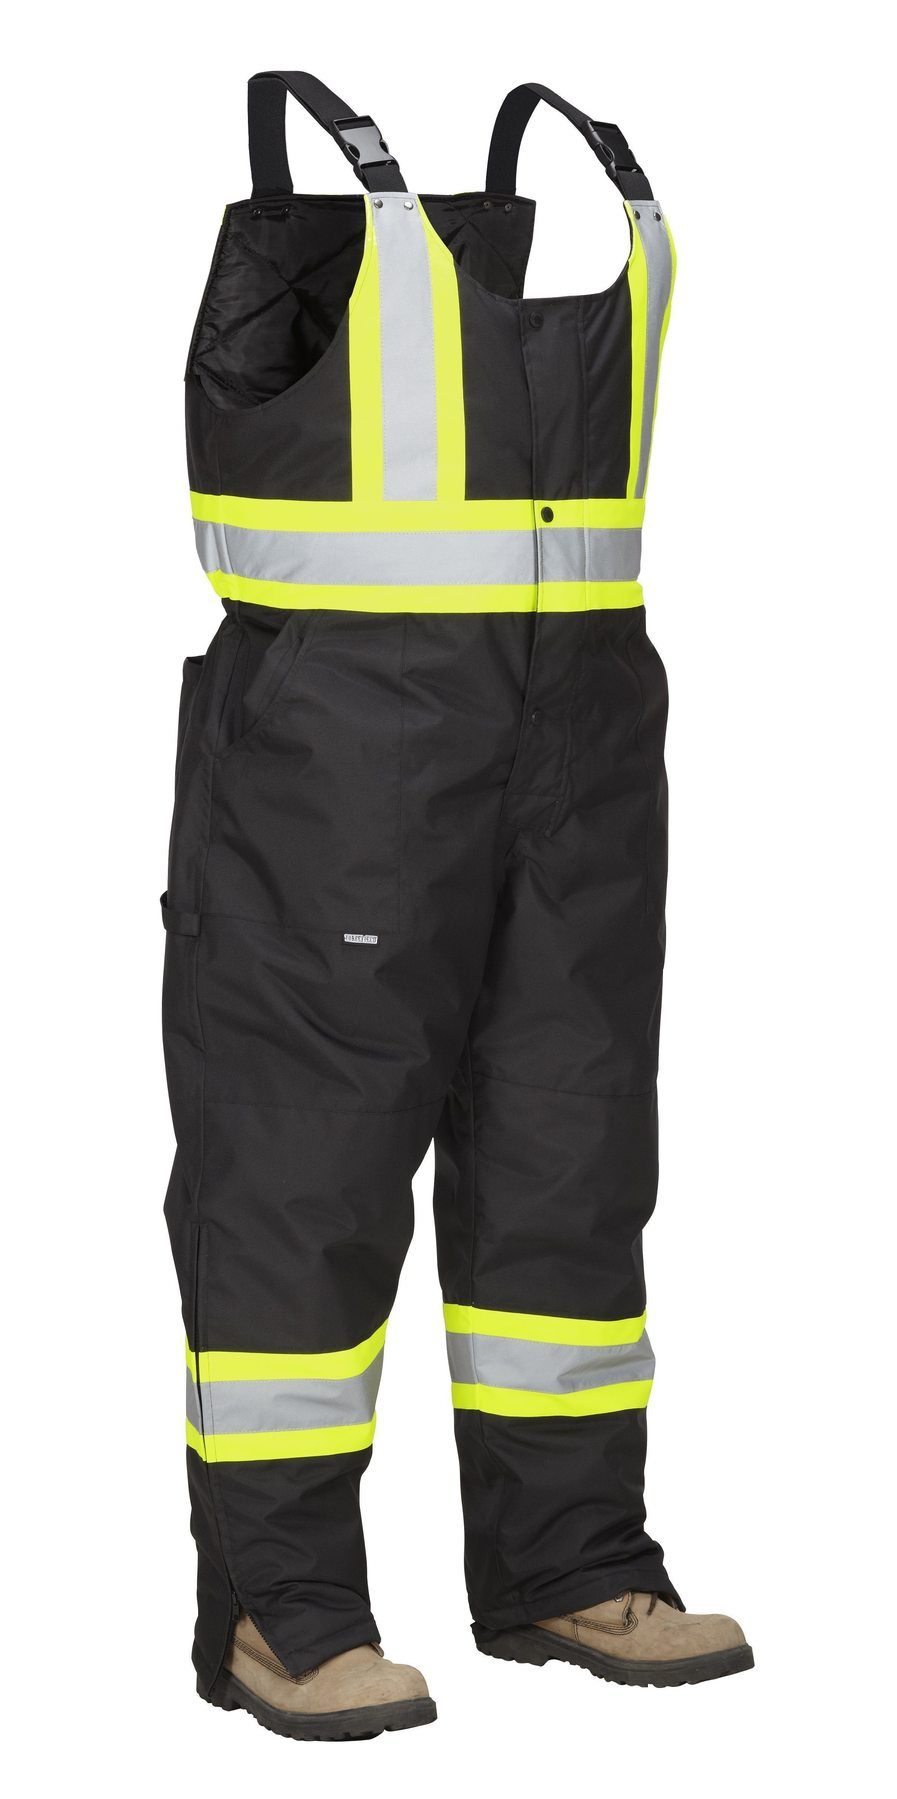 Forcefield - Deluxe Safety Bib Overall - 024-EN835RBK - Black